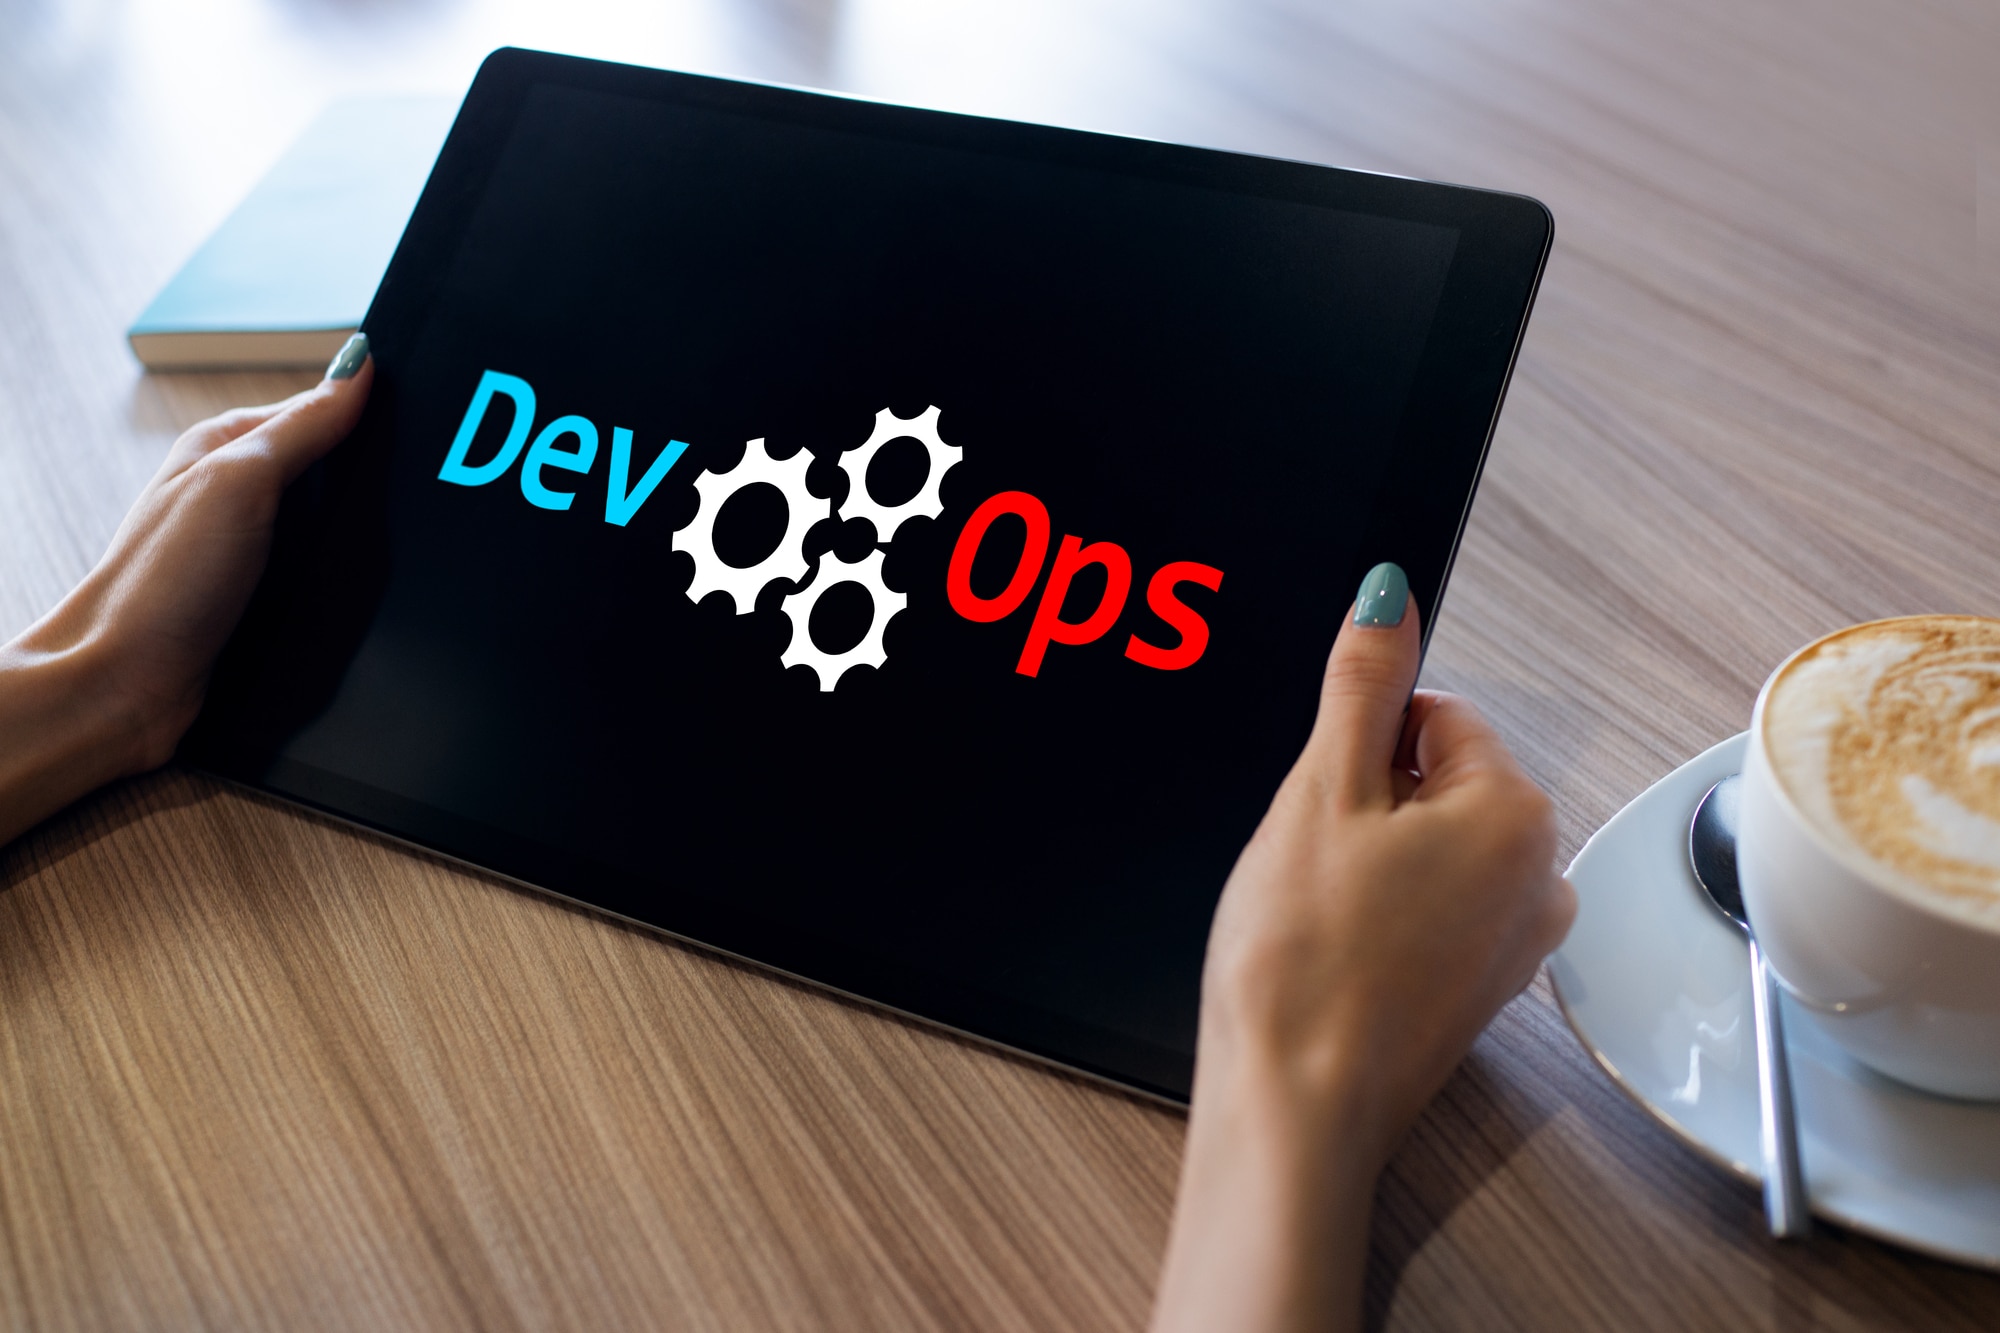 DevOps - development cycles of Automation and monitoring at all steps of software construction